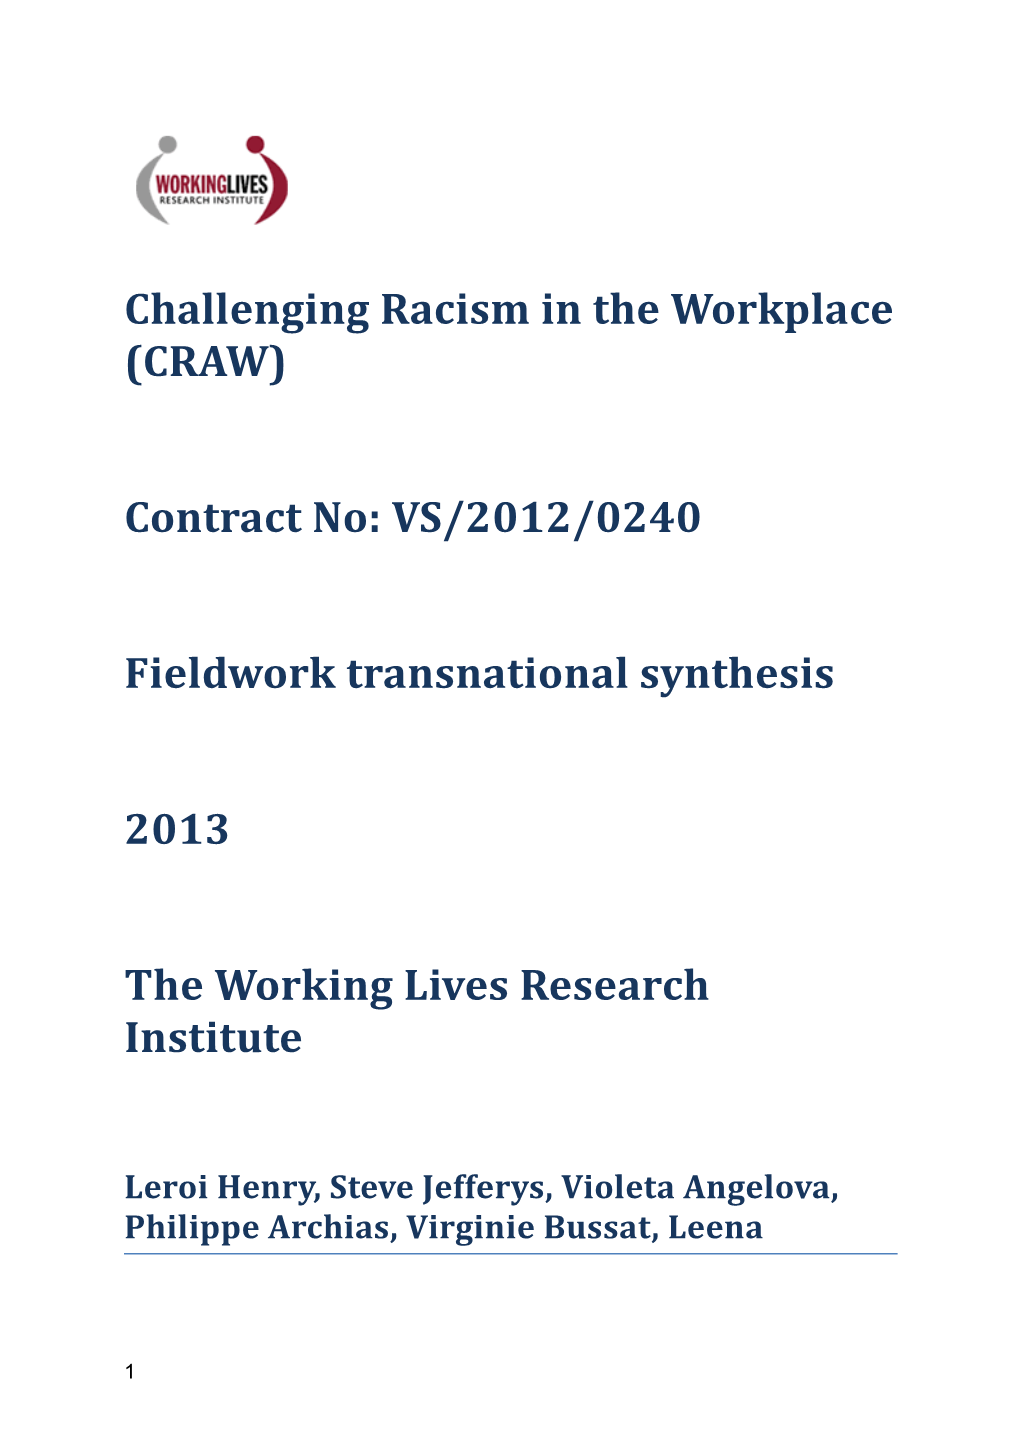 Challenging Racism in the Workplace (CRAW)